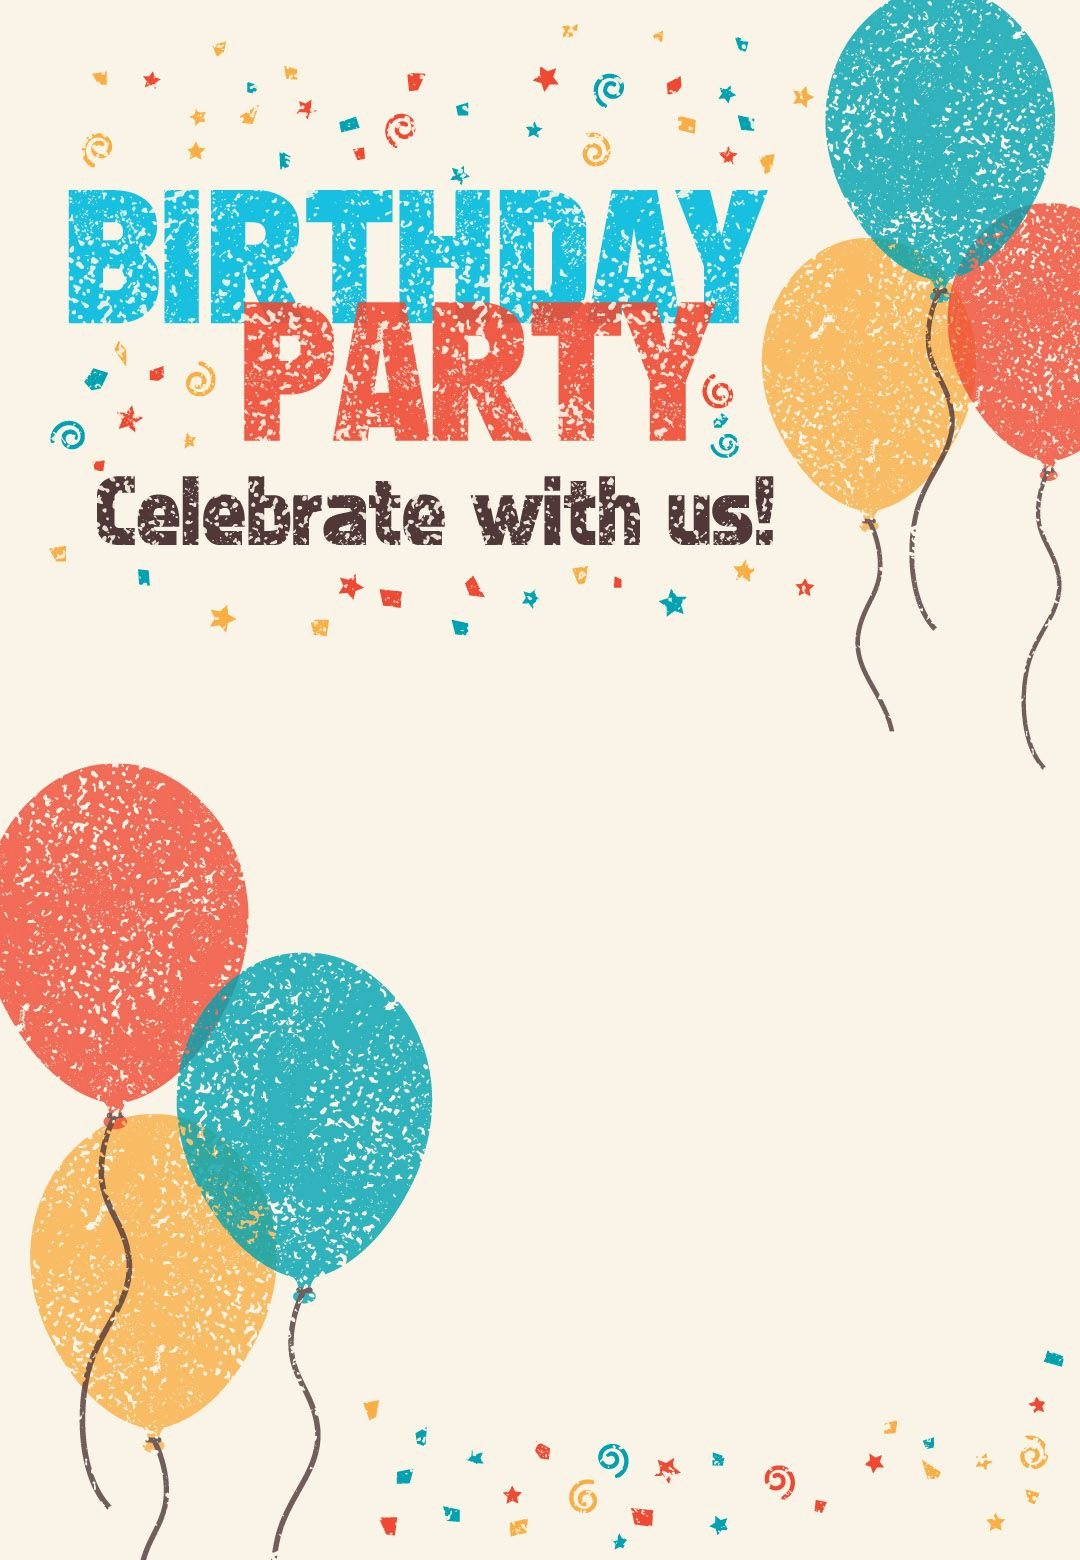 Free Party Invitation Templates Awesome Free Printable Celebrate with Us Invitation Great Site